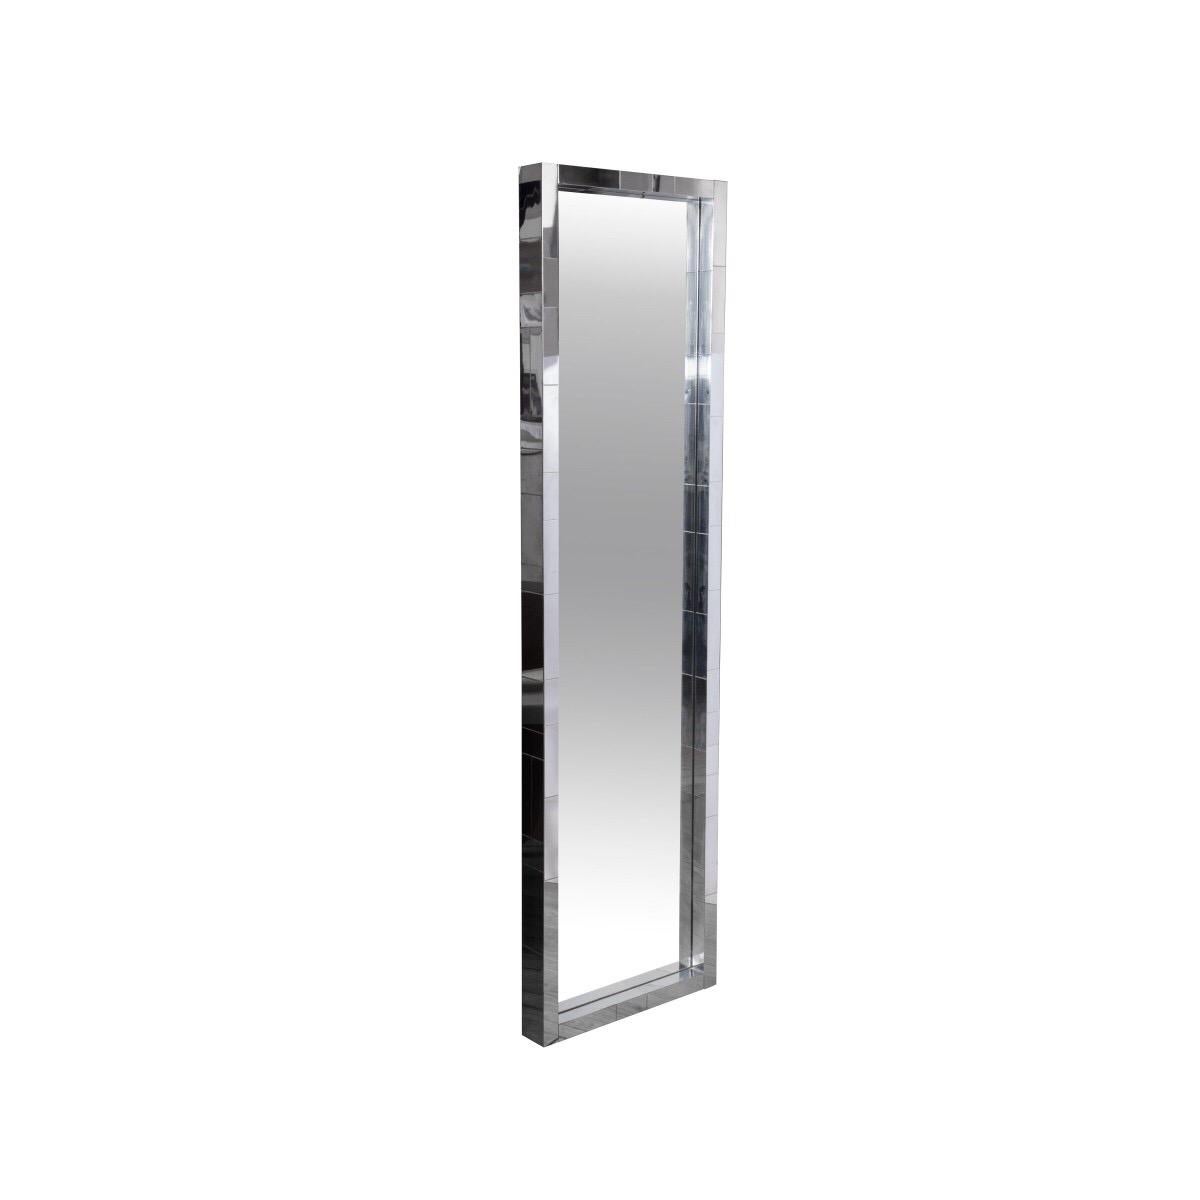 A Cityscape collection rectangular wall or floor mirror with chrome-plated steel and mirrored finish; designed by Paul Evans Studio for Directional Furniture. USA, circa 1970. Signed.

At six feet tall, this mirror may either be hung vertically